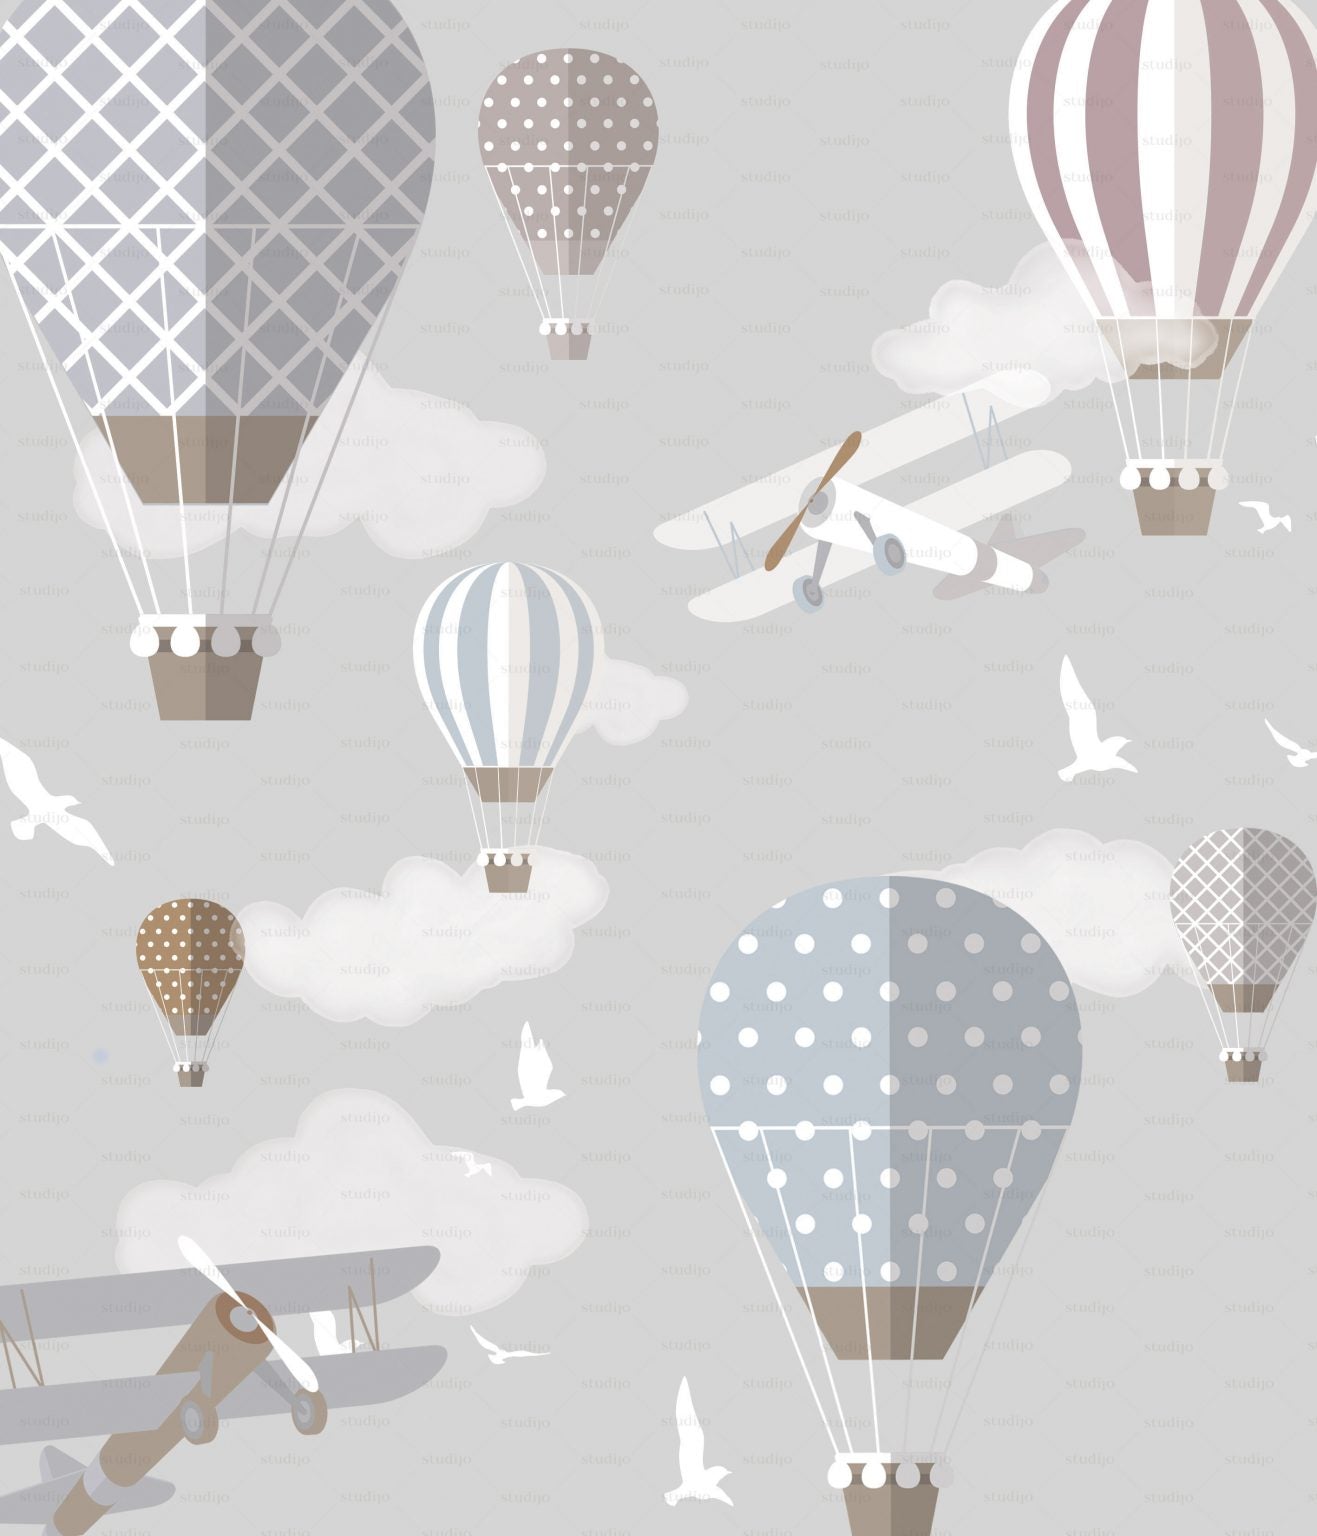 Airplanes and balloons